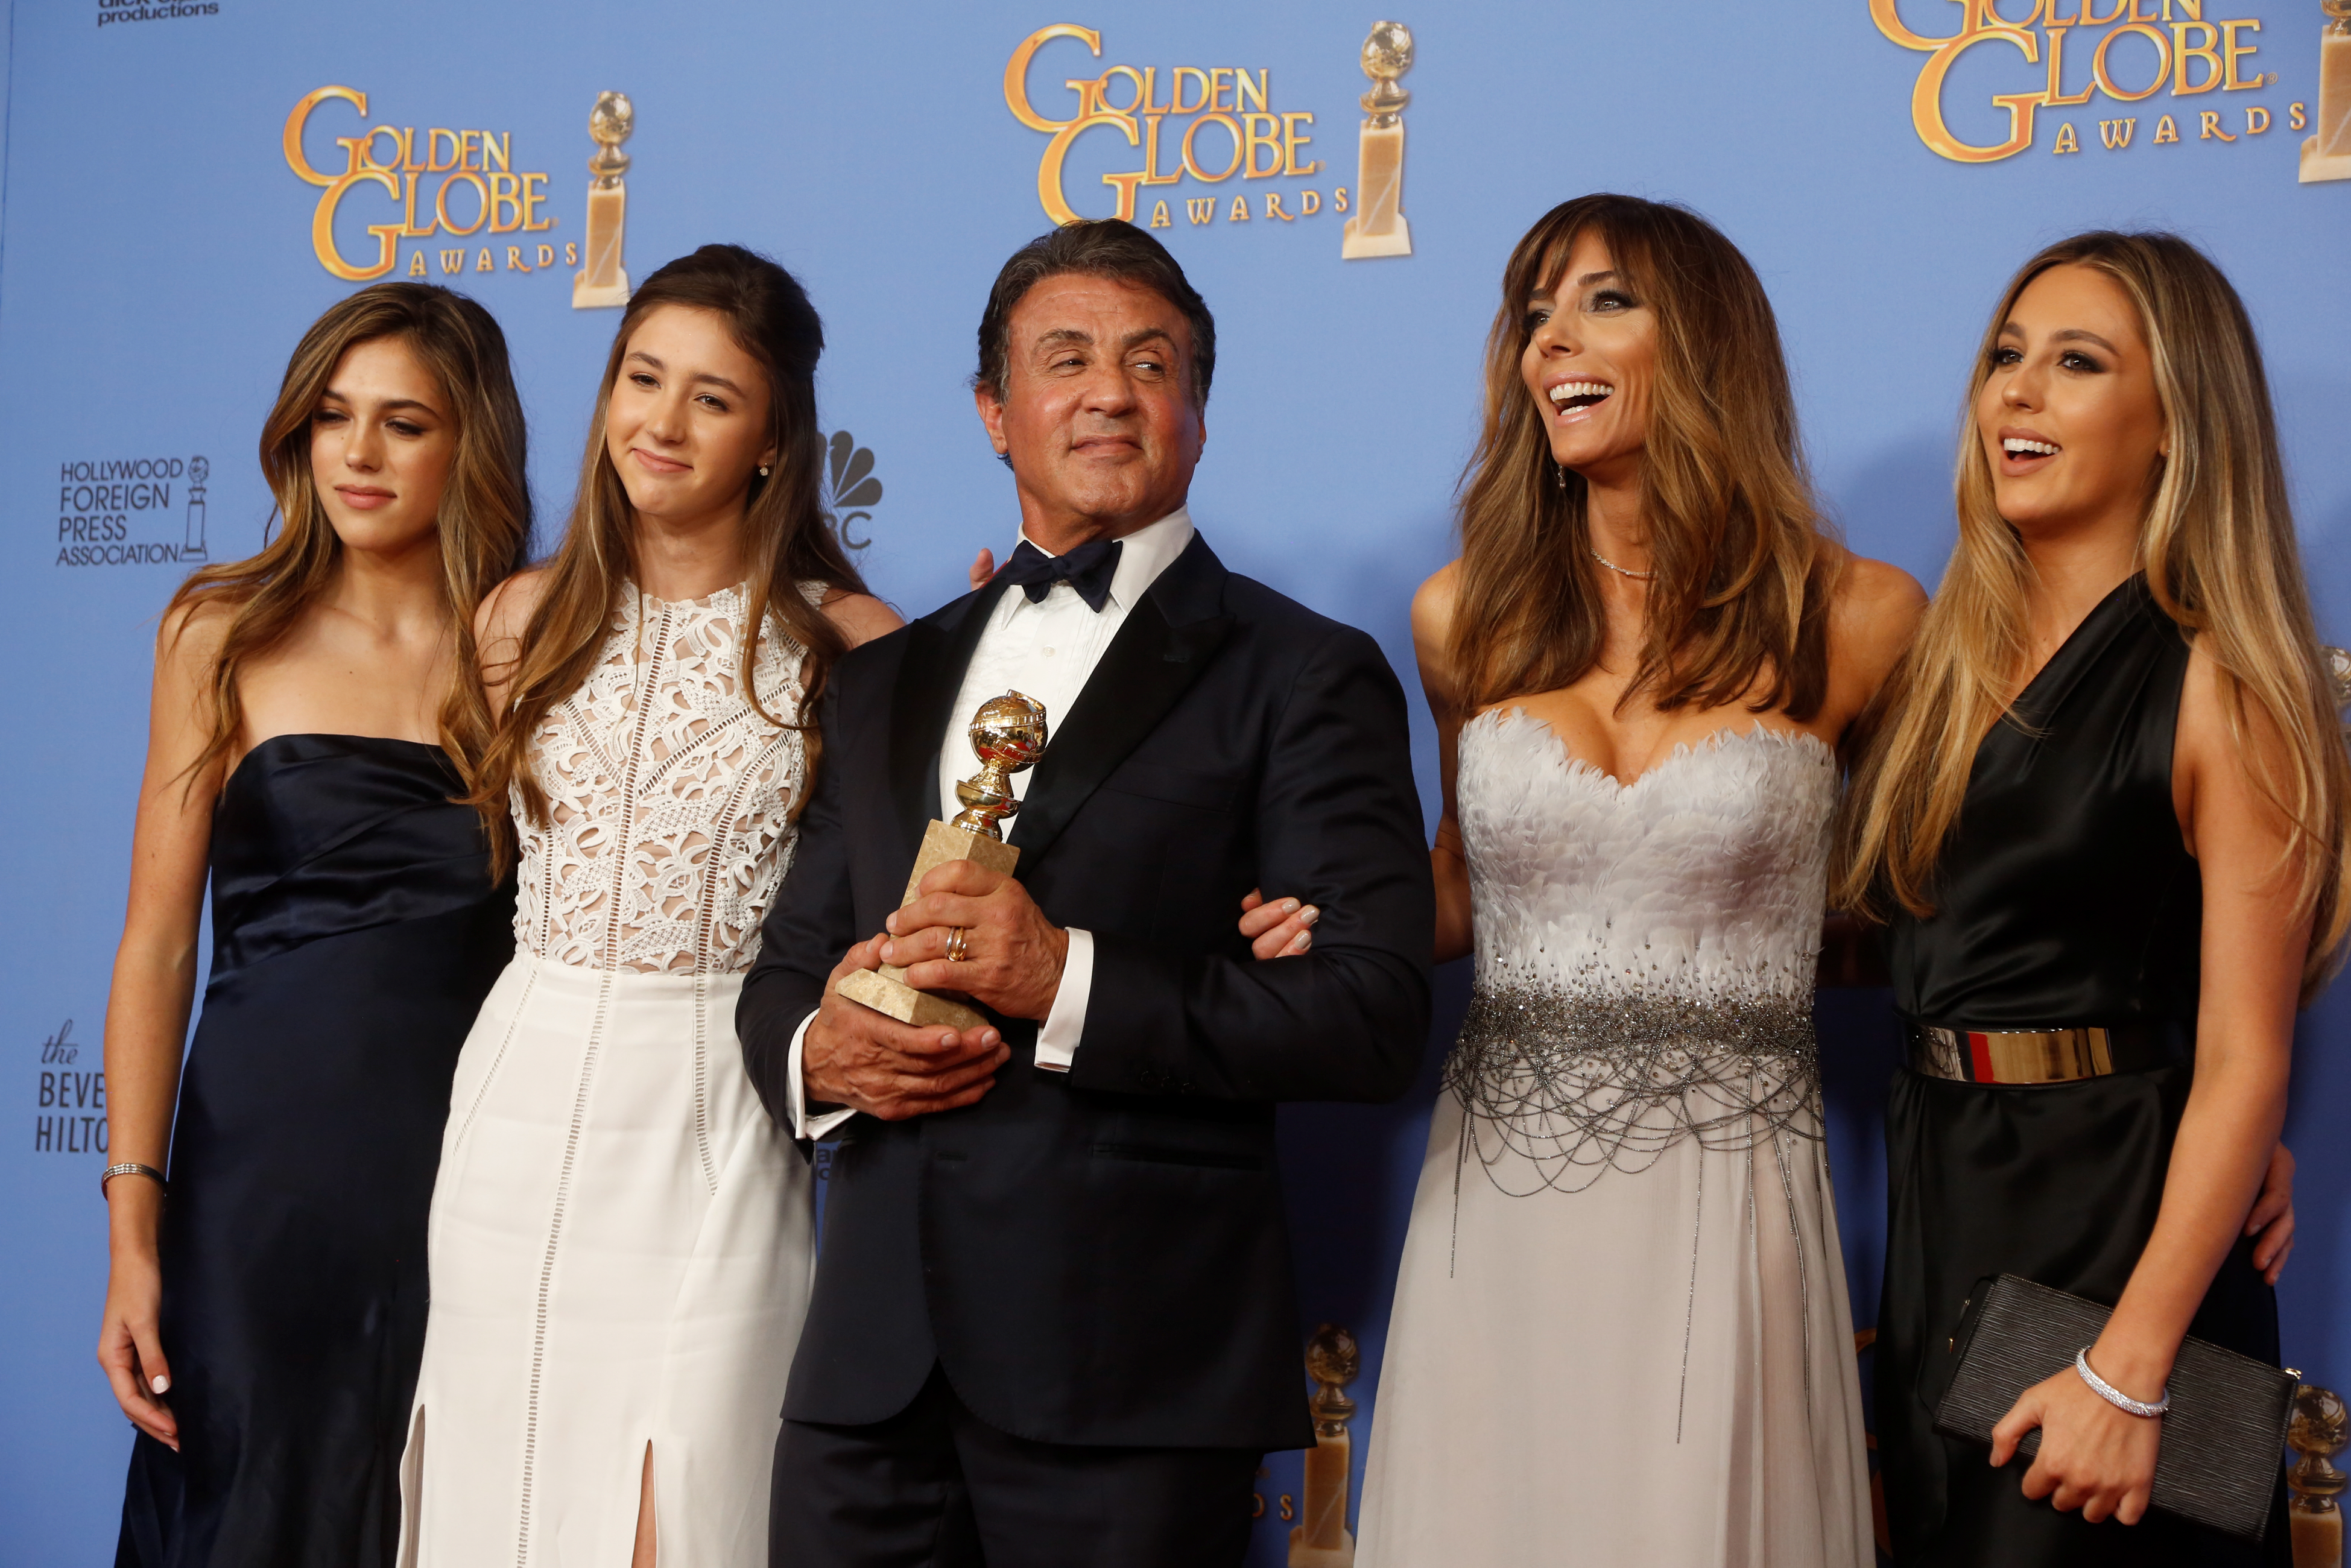 Sistine, Scarlet, and Sylvester Stallone with Jennifer Flavin and Sophia Stallone at the 73rd Annual Golden Globe Awards in Beverly Hills, 2016 | Source: Getty Images